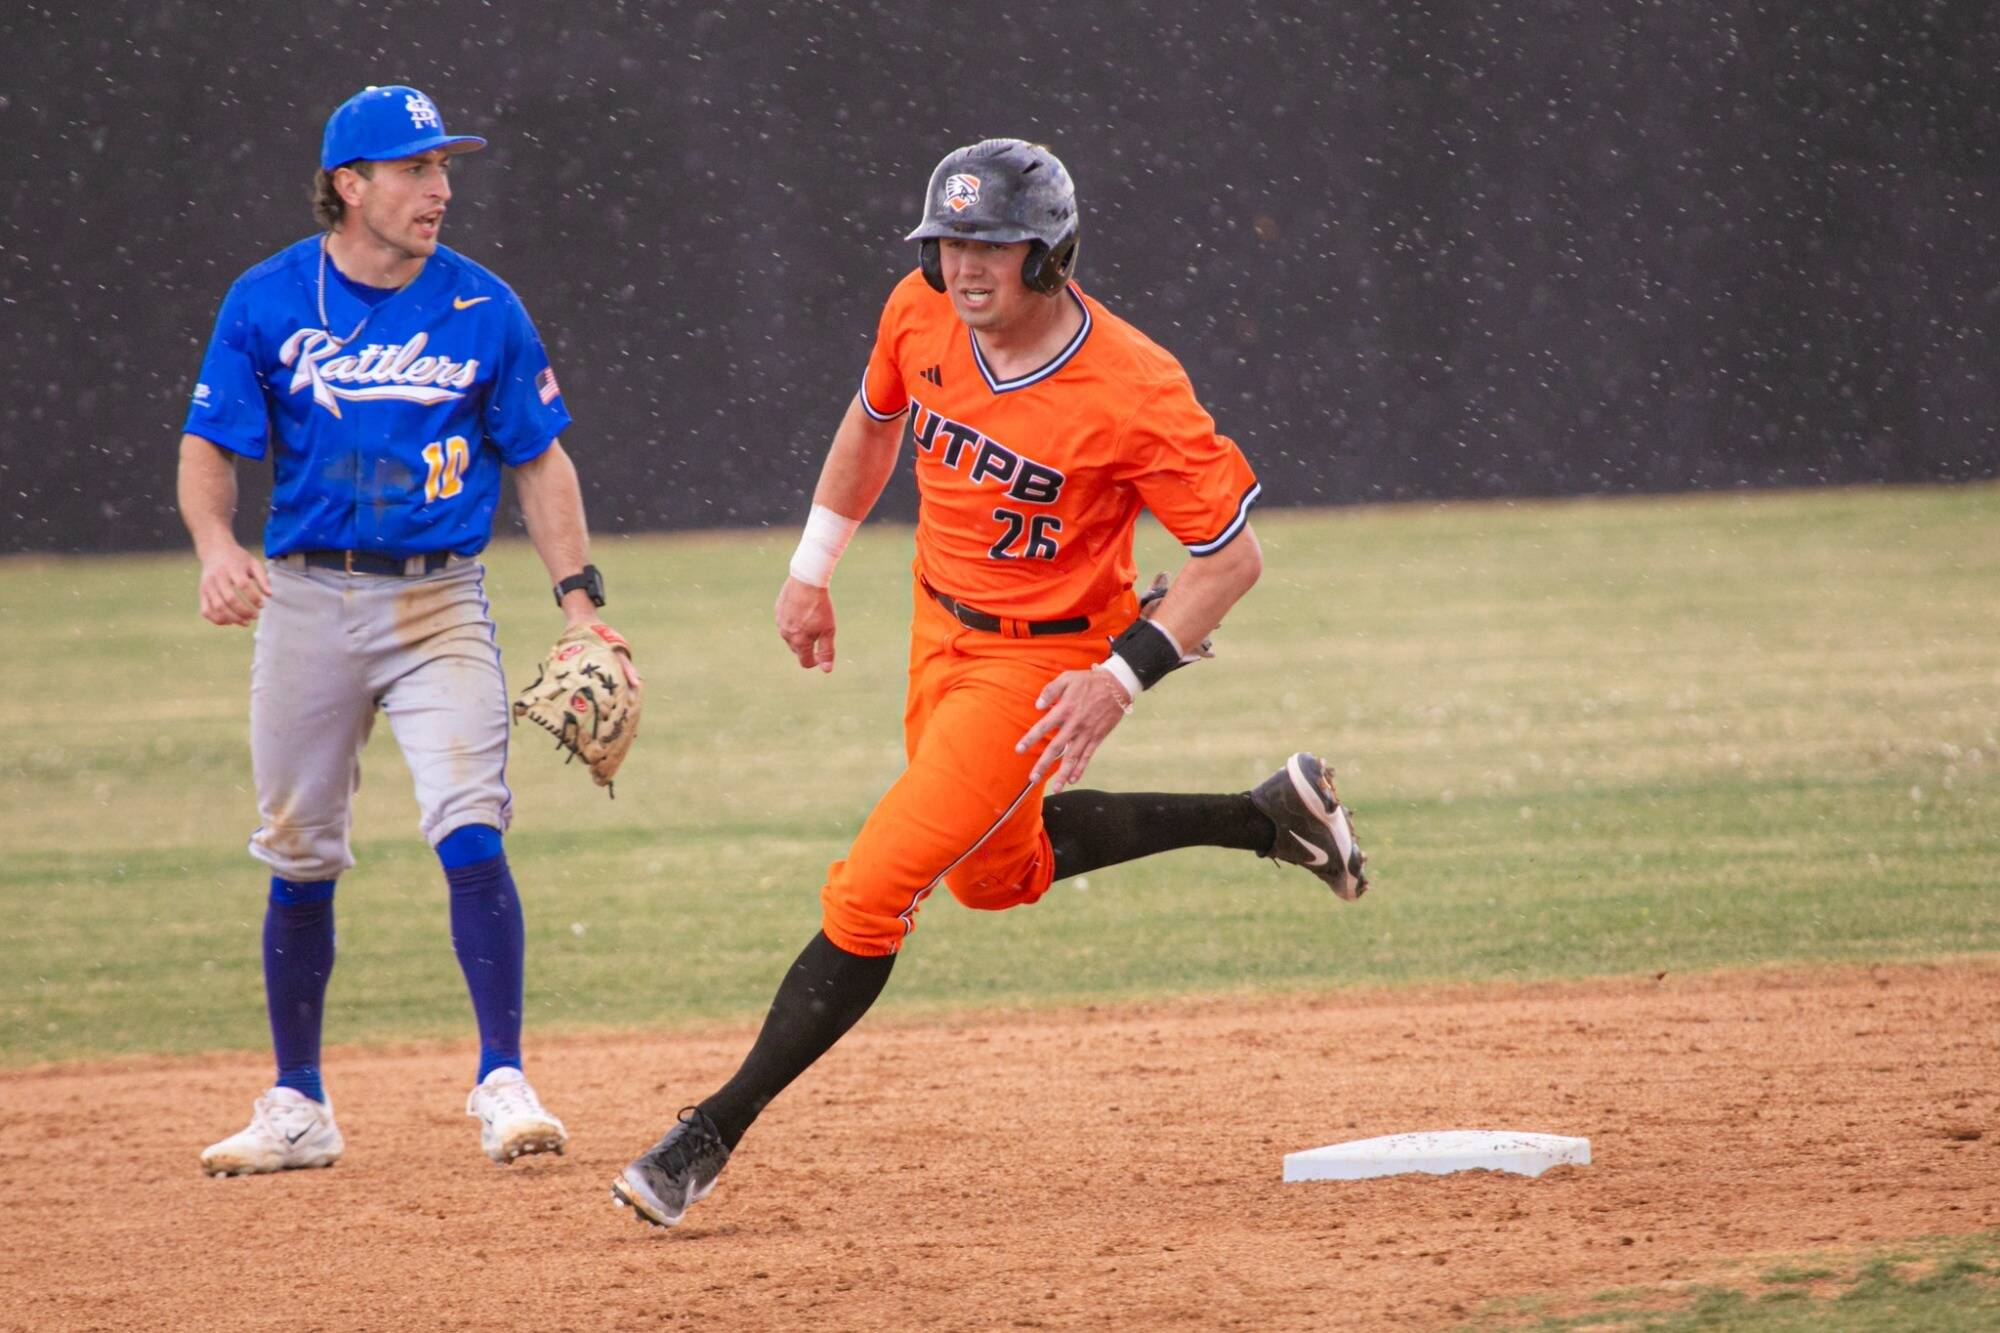 UTPB Athletic Communications 
University of Texas Permian Basin outfielder Ethan Flodstrom rounds the bases during a contest against St. Mary’s. Flodstrom, a 2020 Port Angeles graduate, leads his team with a .378 batting average after hitting .407 in 2023.